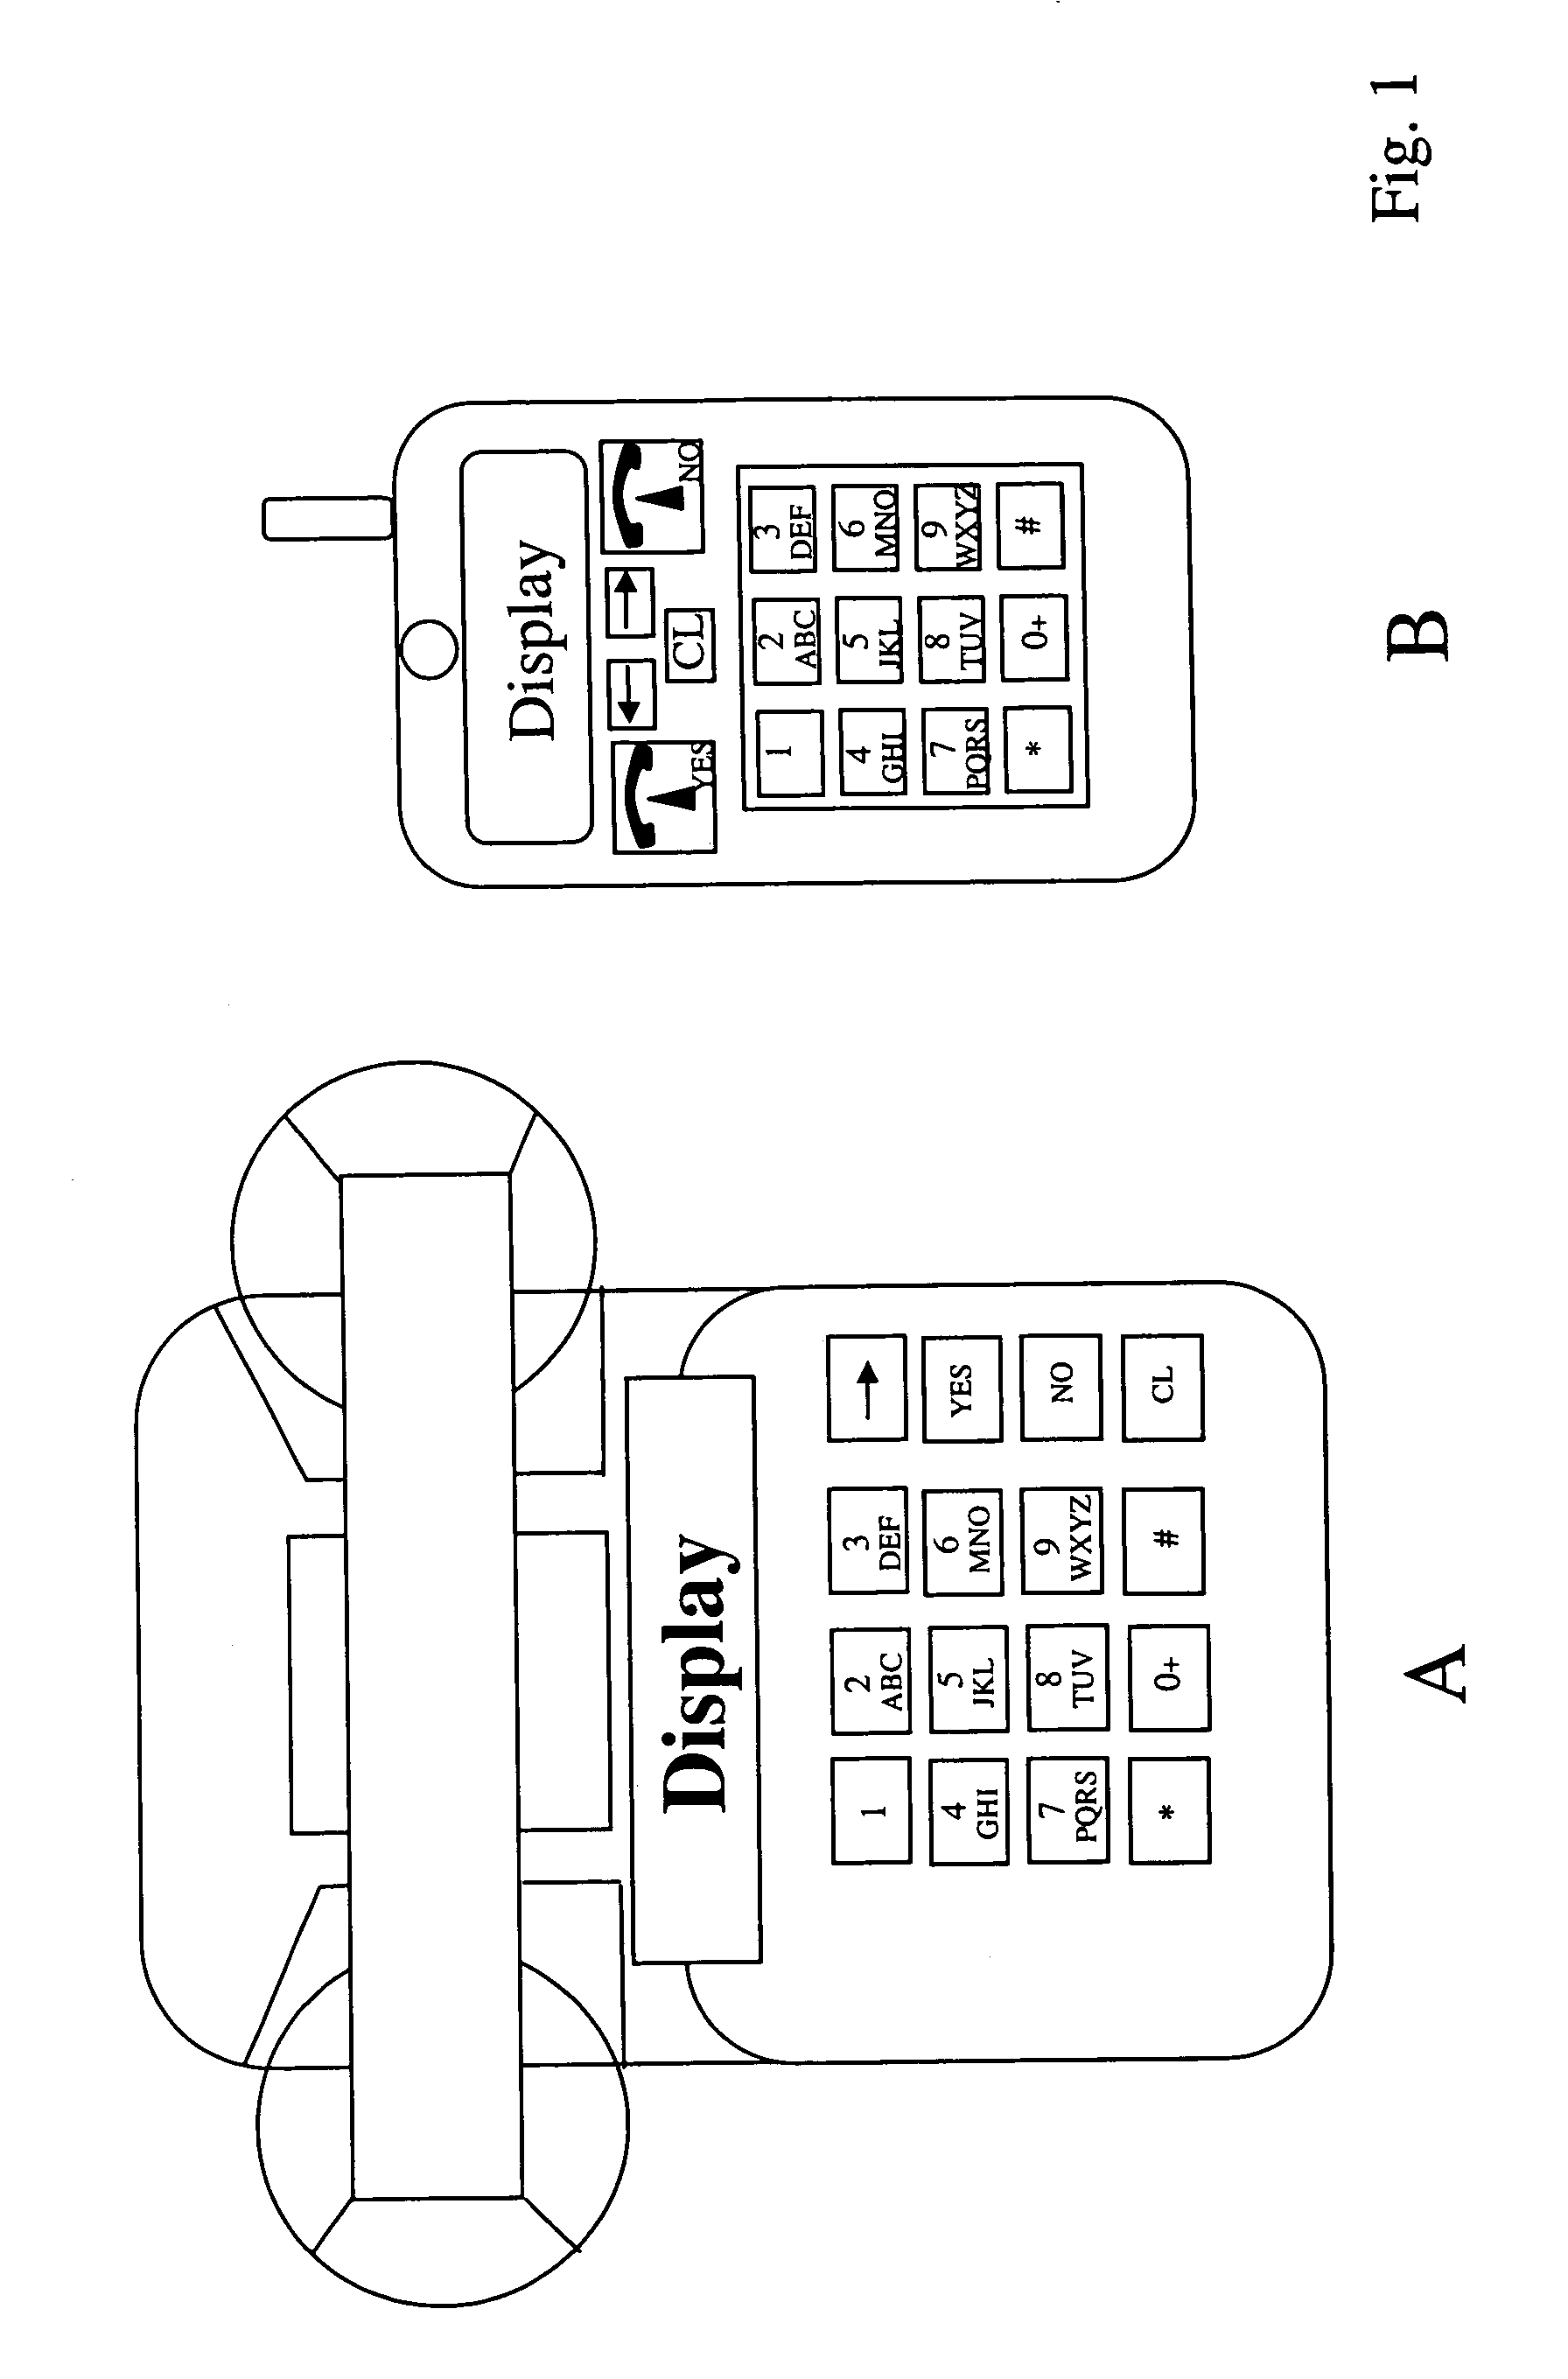 Method for using alphanumerical signs as a call number